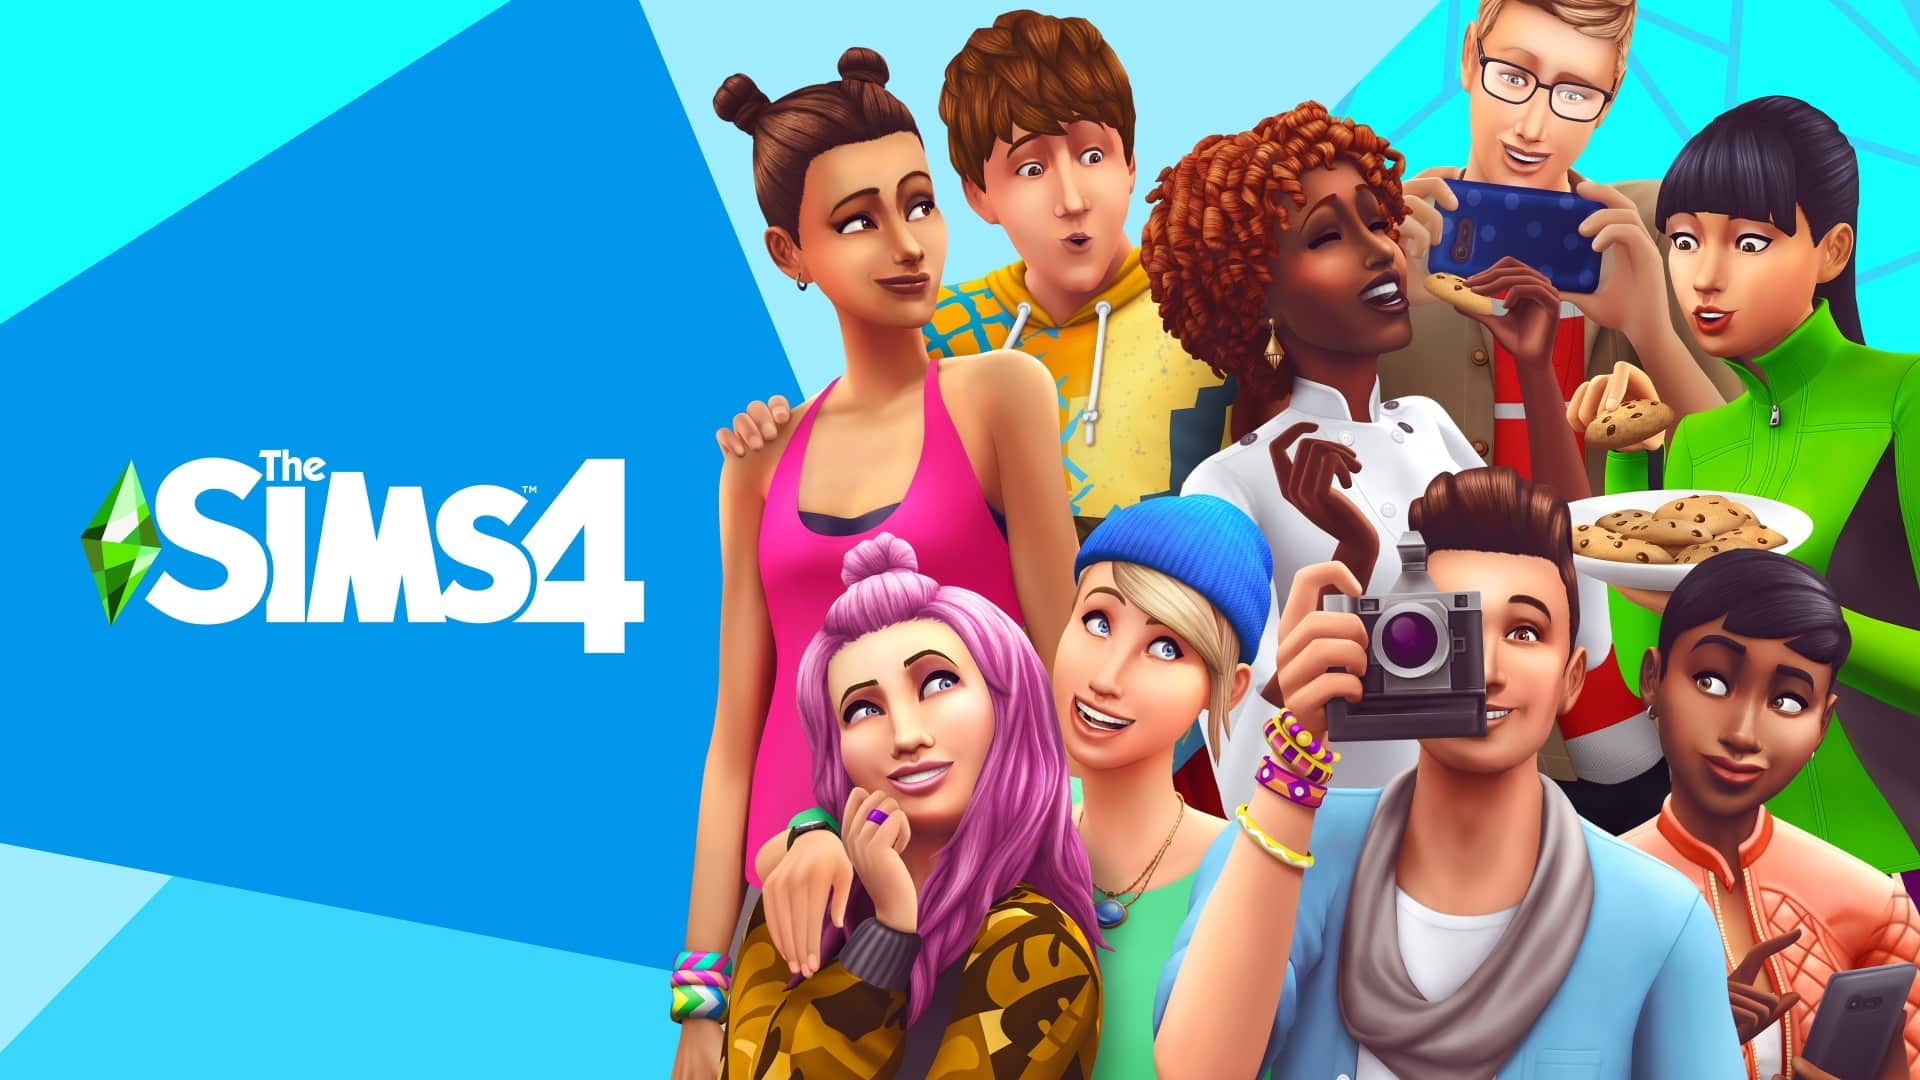 The Sims 4 is finally free-to-play!